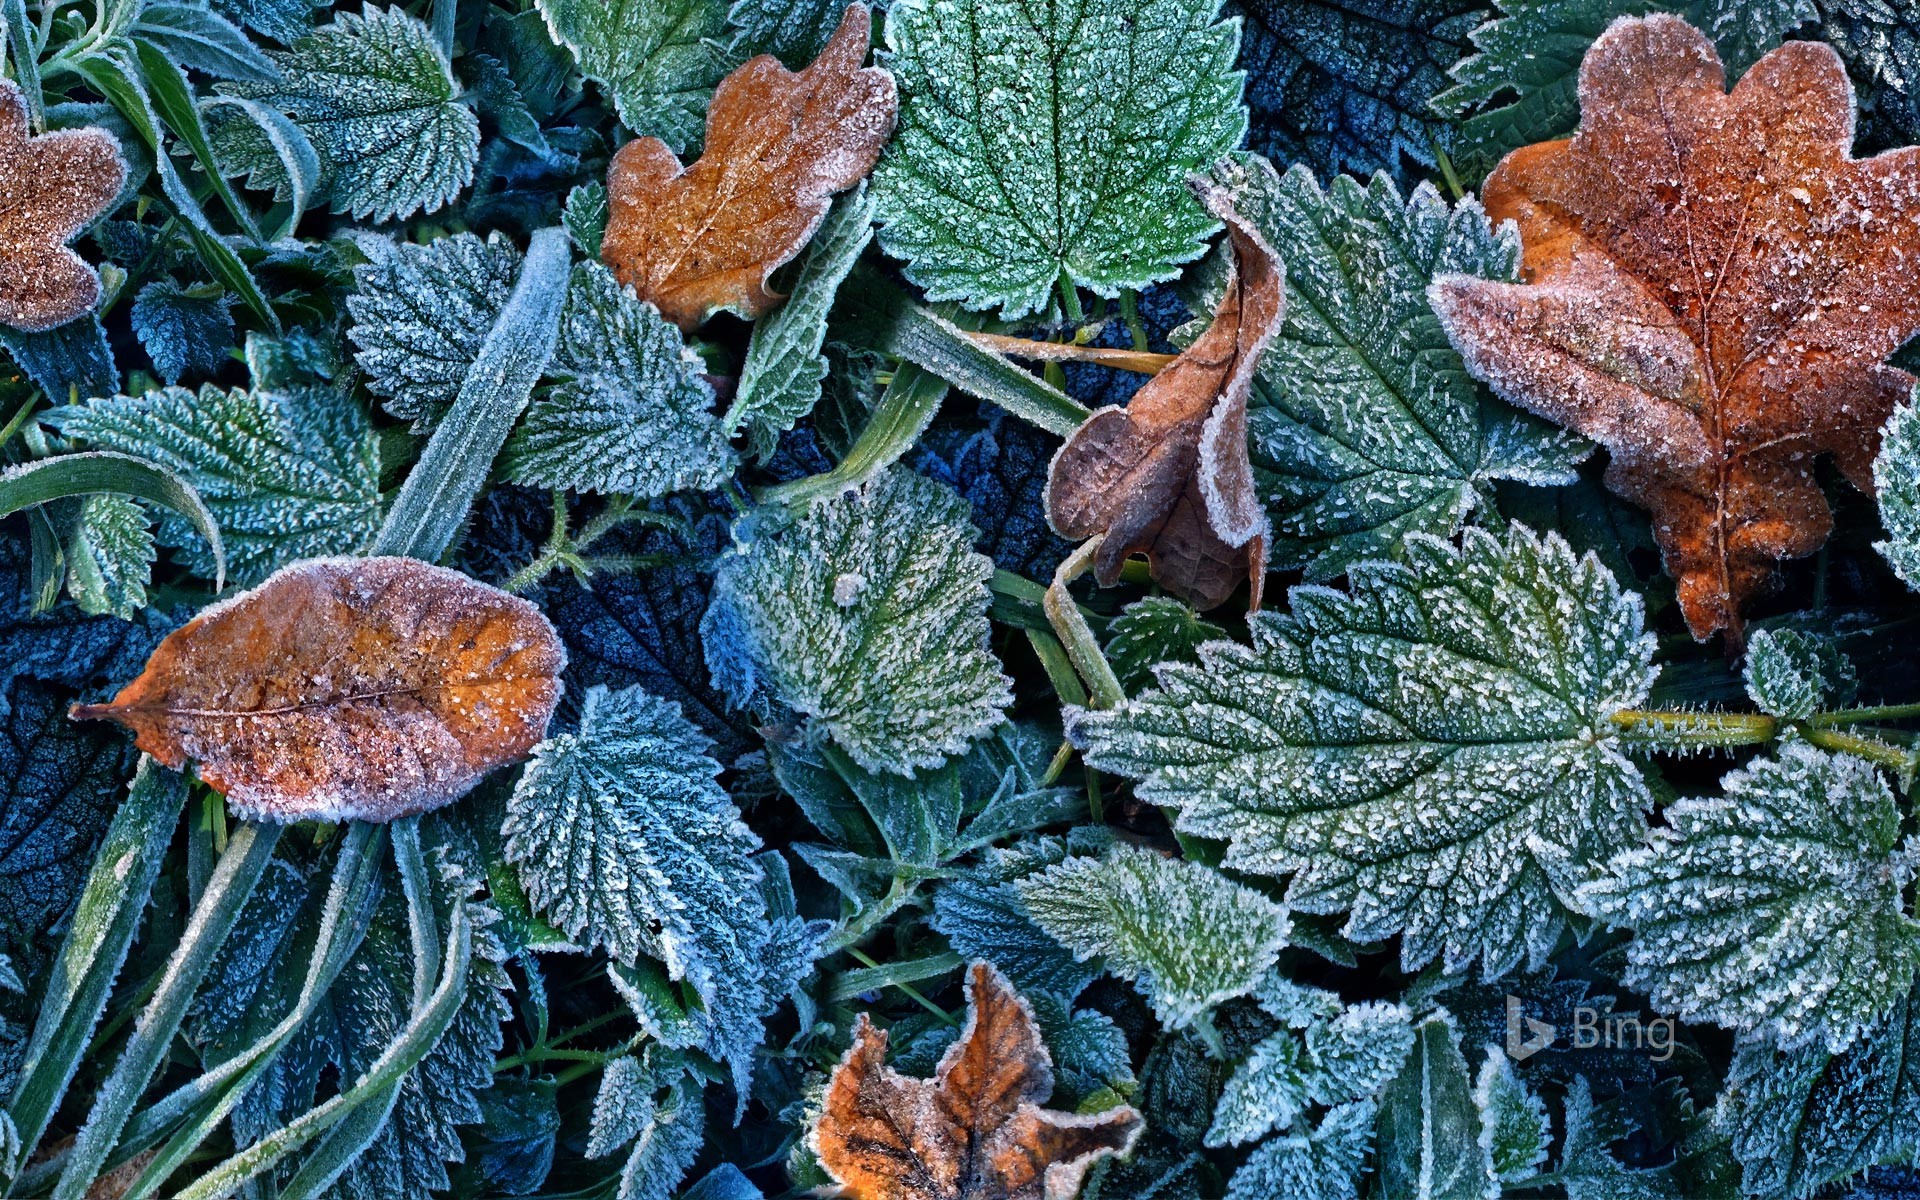 Leaves with hoarfrost in the Black Forest, Freiburg, Baden-Württemberg, Germany